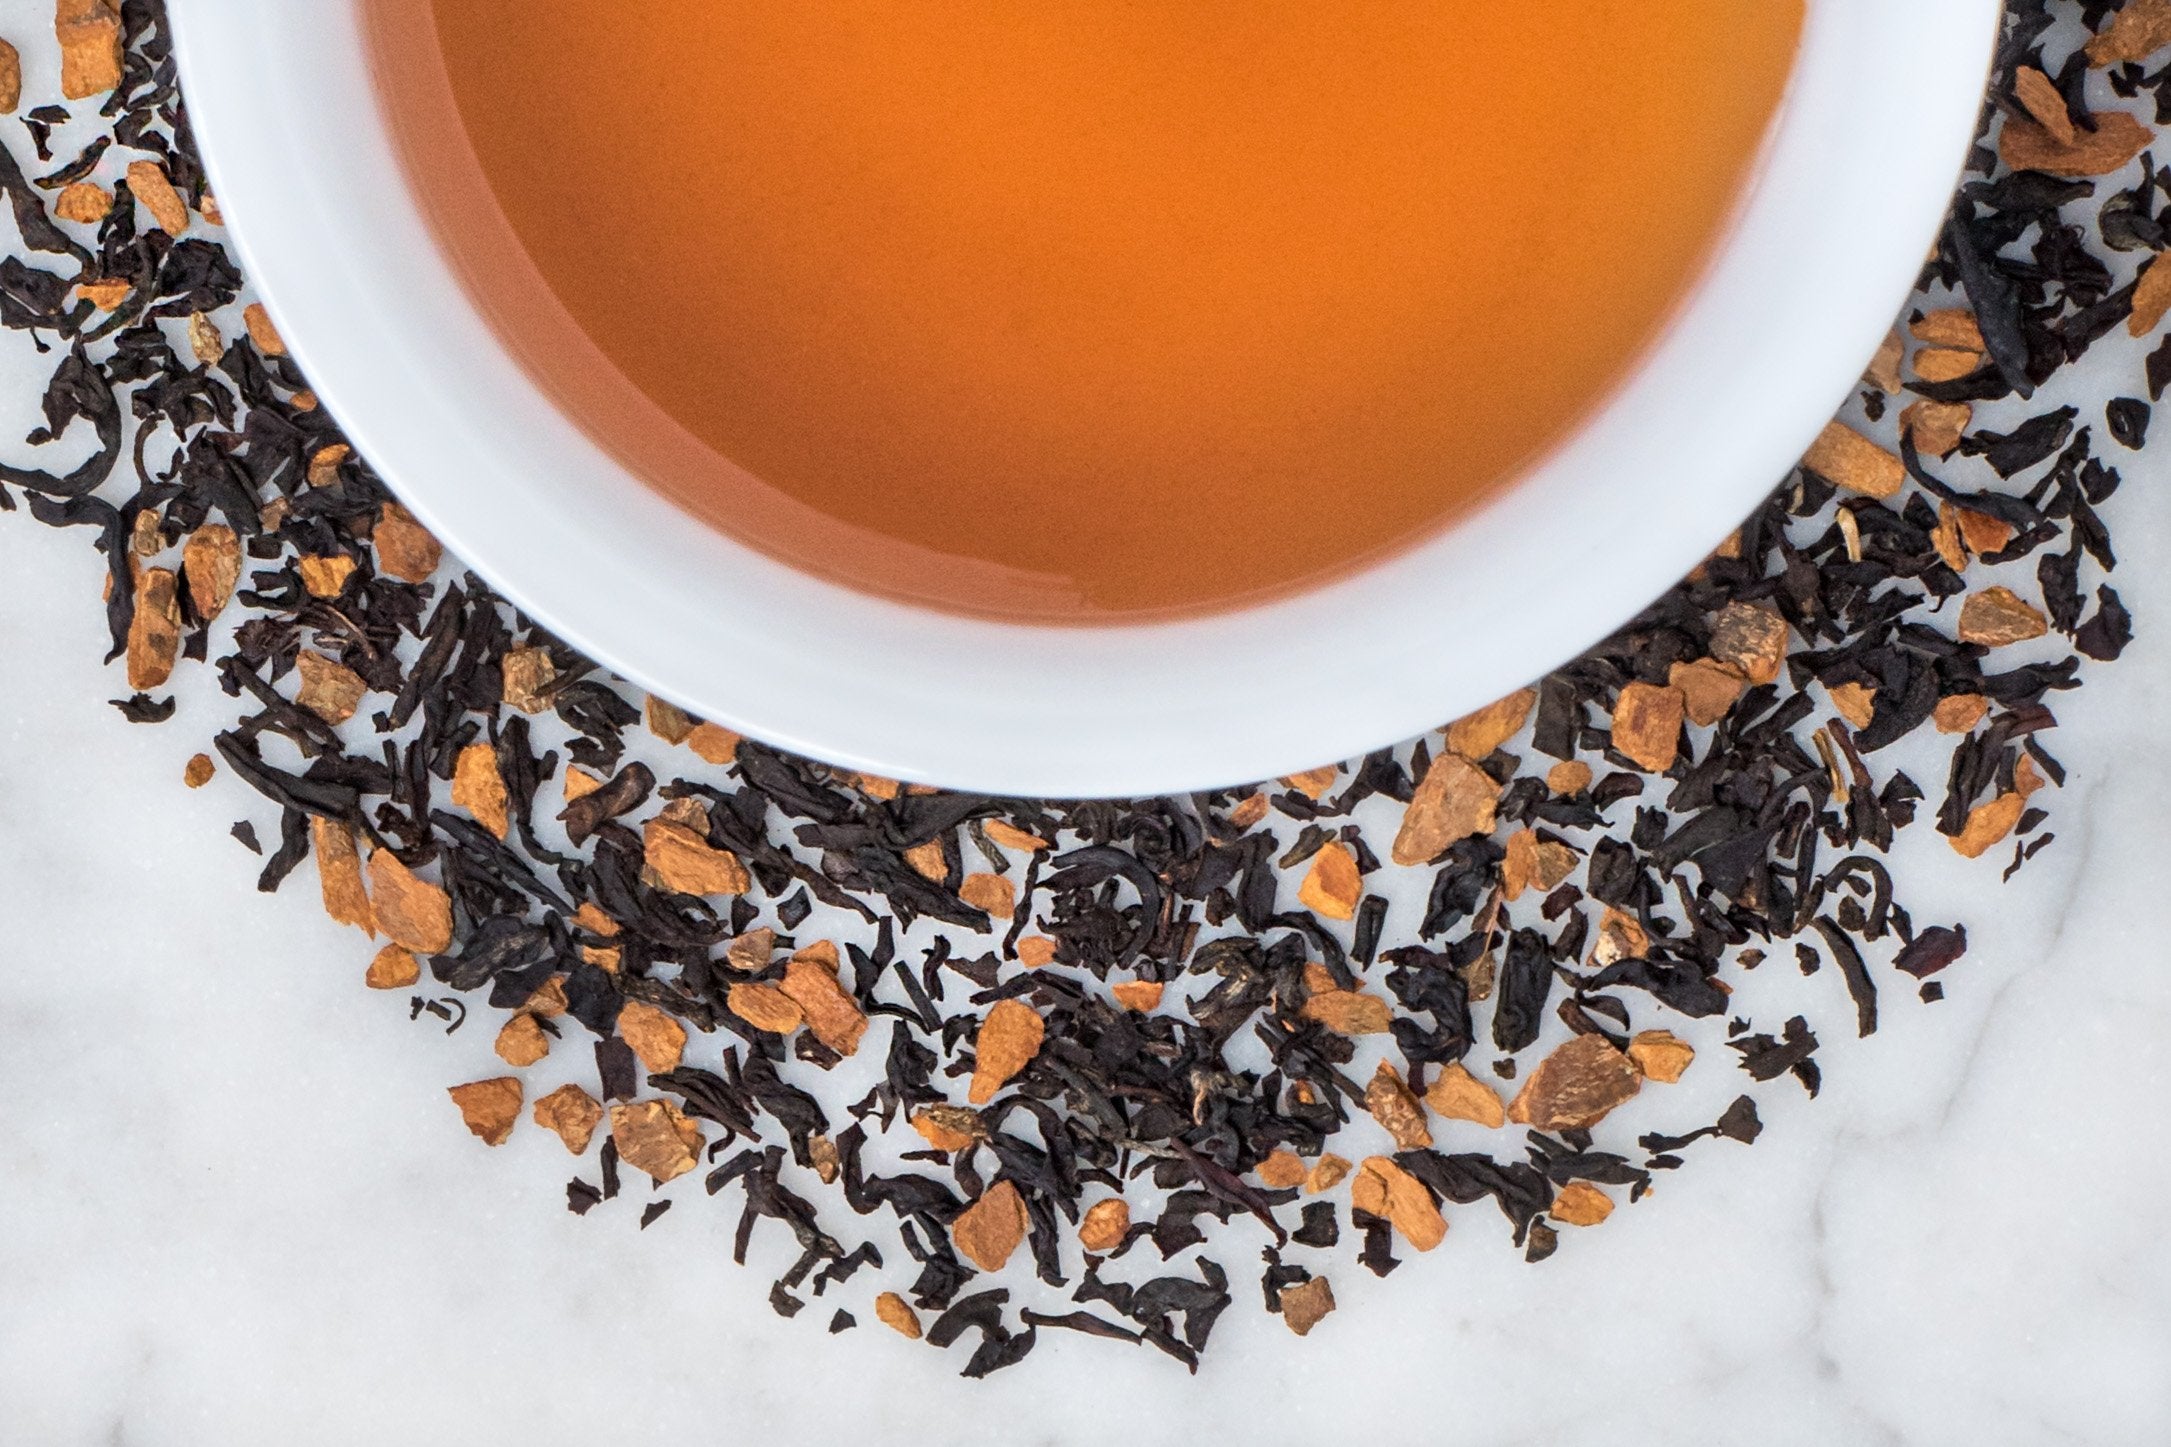 Indian Black Tea Leaves, Spicy Cinnamon and Apple Surround a Delicious Cup Of Spiced Brewed Istanbul Apple